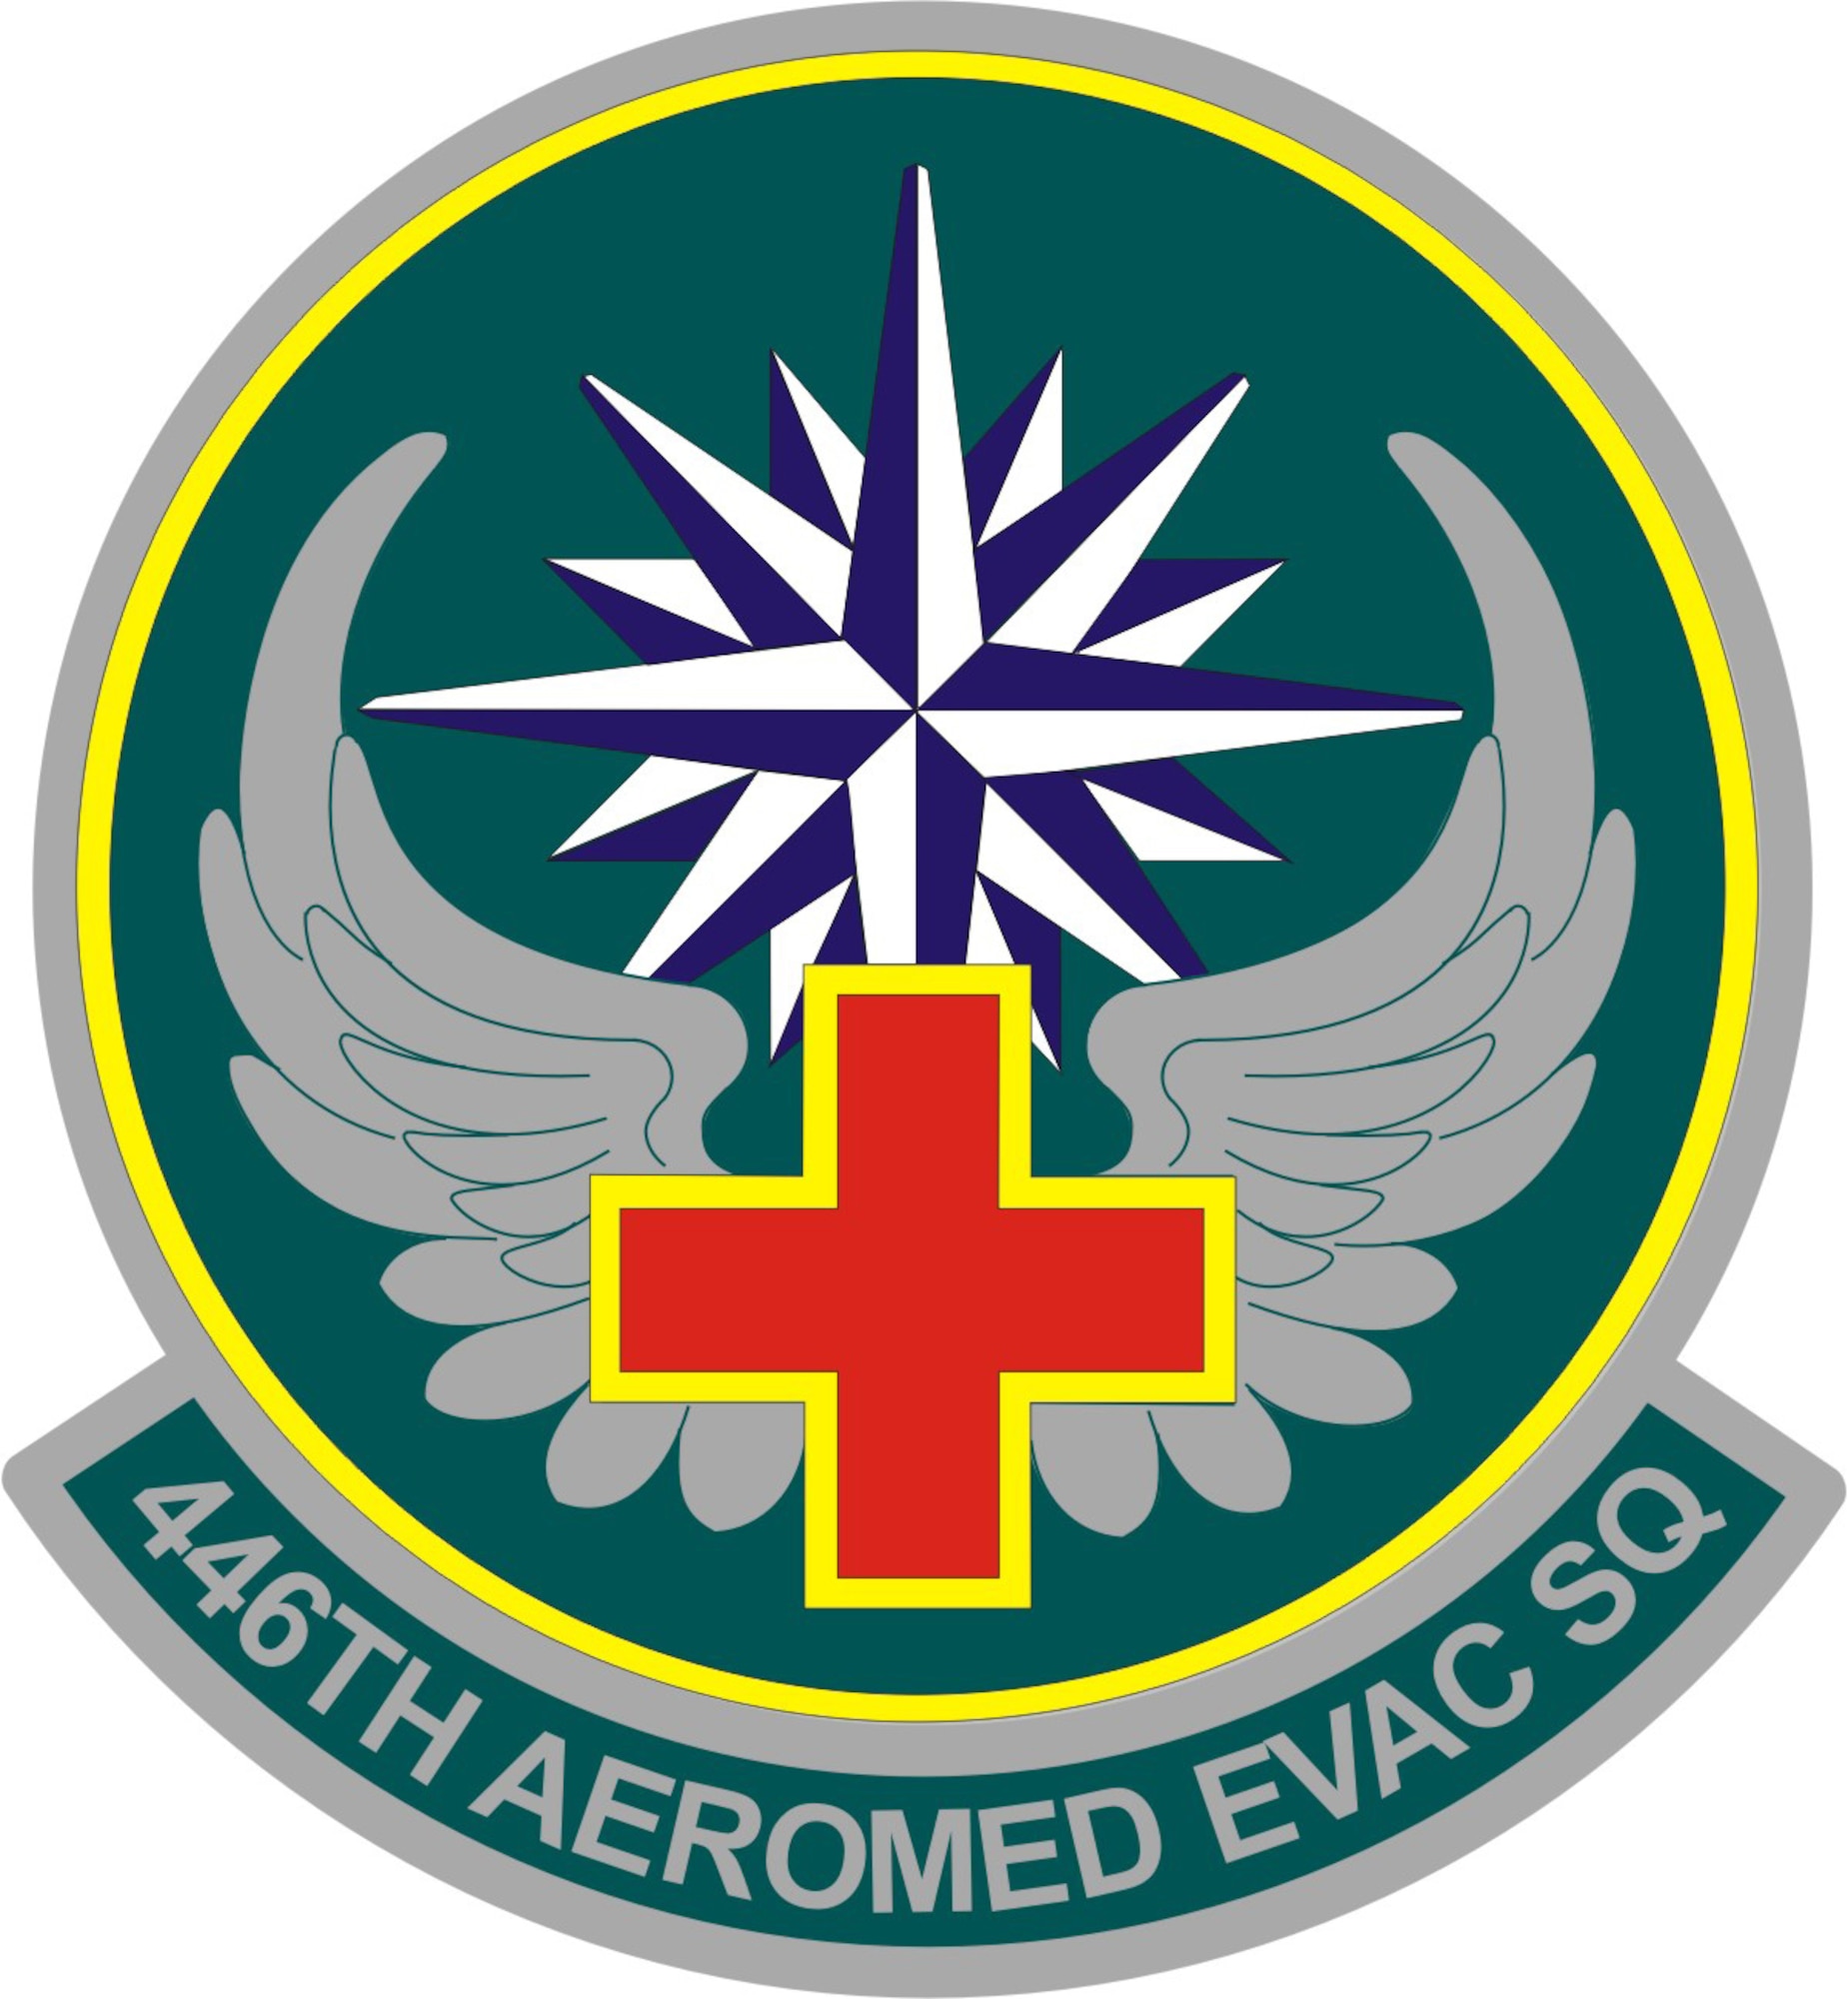 The 446th Aeromedical Evacuation Squadron, an Air Force Reserve unit, celebrates 50 years of saving lives with a picnic July 12 at Heritage Hill, McChord Air Force Base, Wash.  The Air Force Reserve provides 63 percent of the Air Force's aeromedical evauation capability.